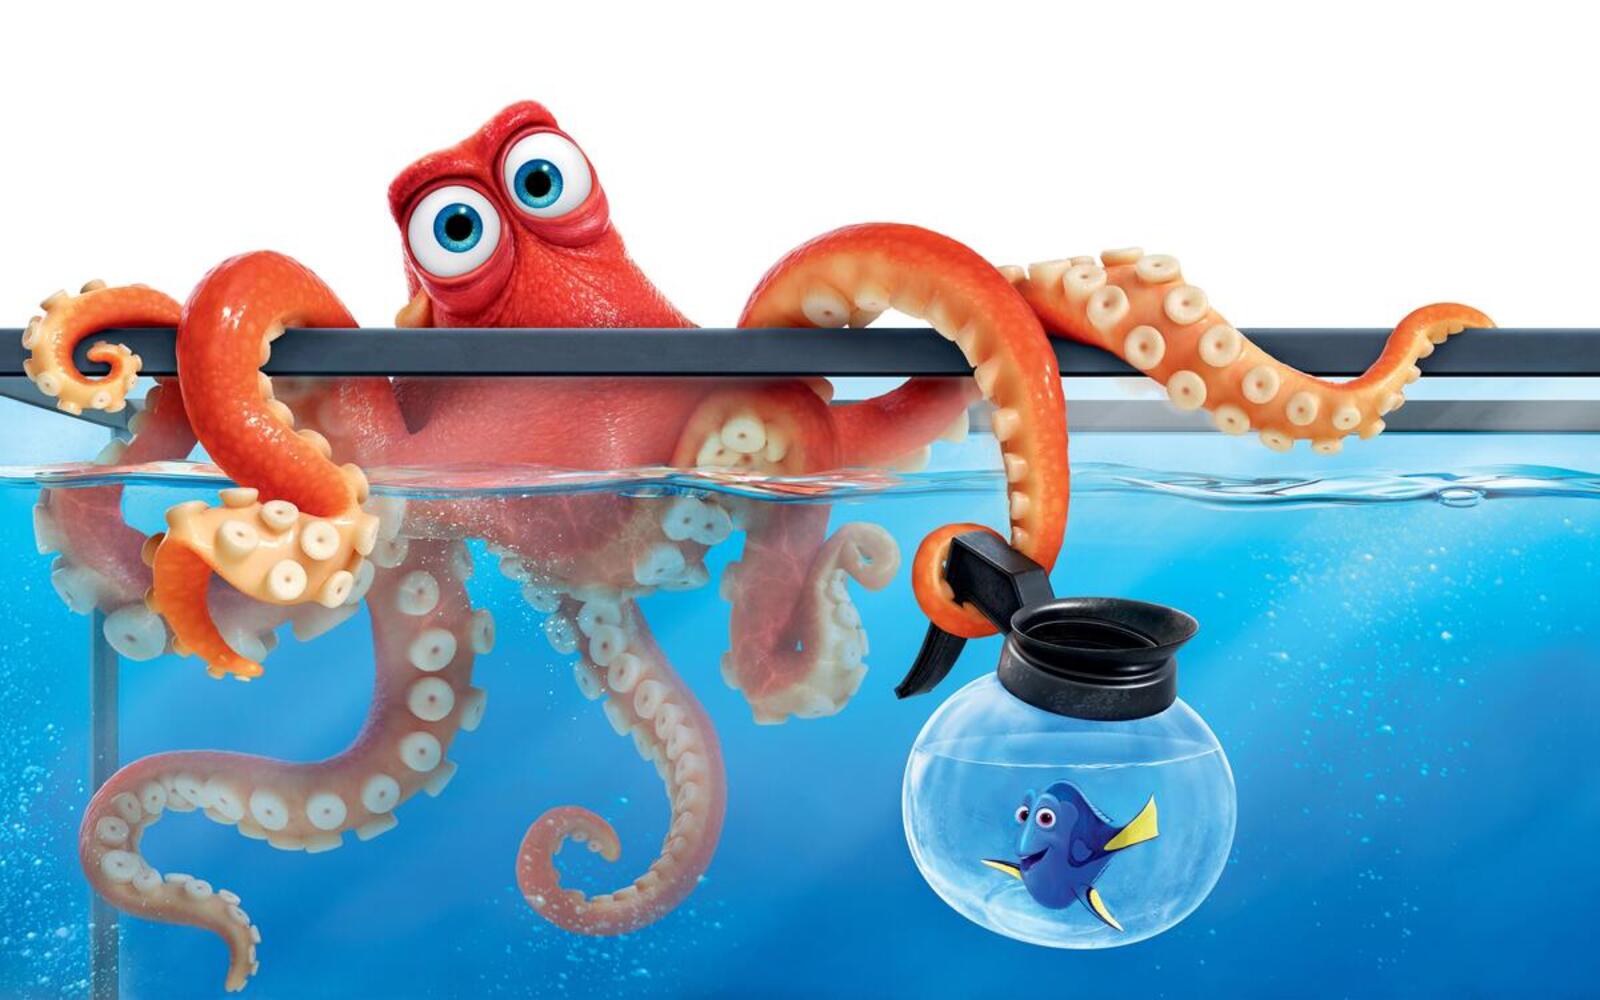 Wallpapers animation octopus wallpaper finding dory on the desktop